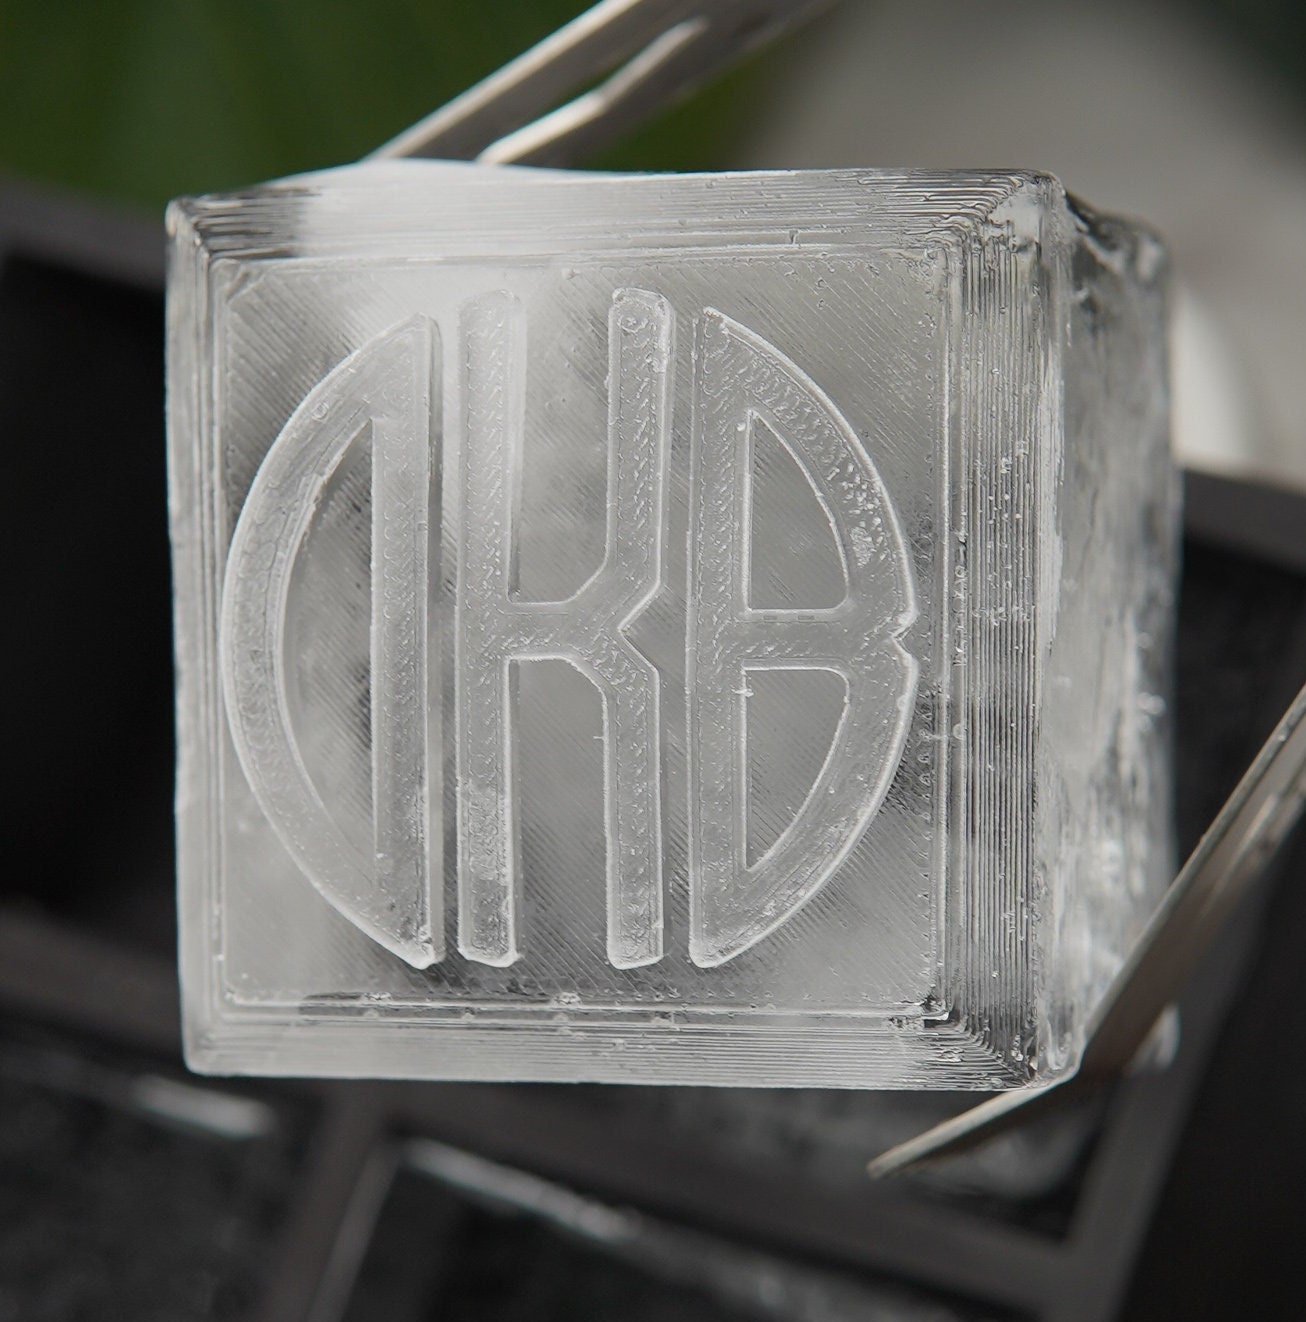  Personalized Silicone Ice Cube Mold Tray with Monogram text  initials for Whiskey and Cocktails - 2 Inch Ice Cubes, Ideal for Customized  Whisky Bartending Party - Perfect Gift for him 